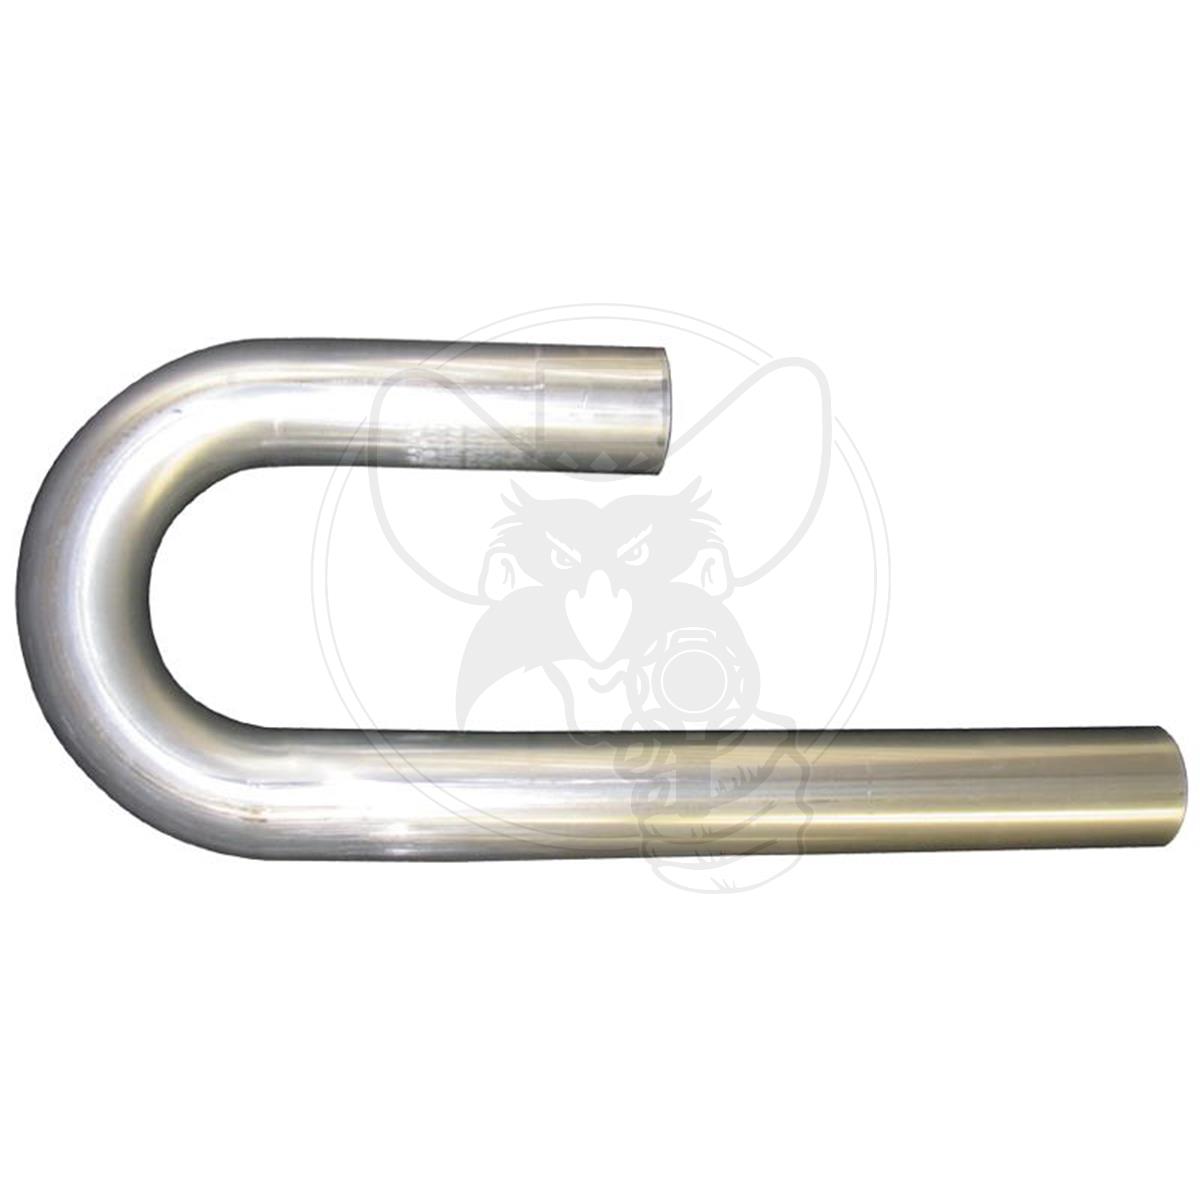 AEROFLOW 180° Stainless J-Bend Tubing 2-3/8" OD WITH 6" & 12" LEGS